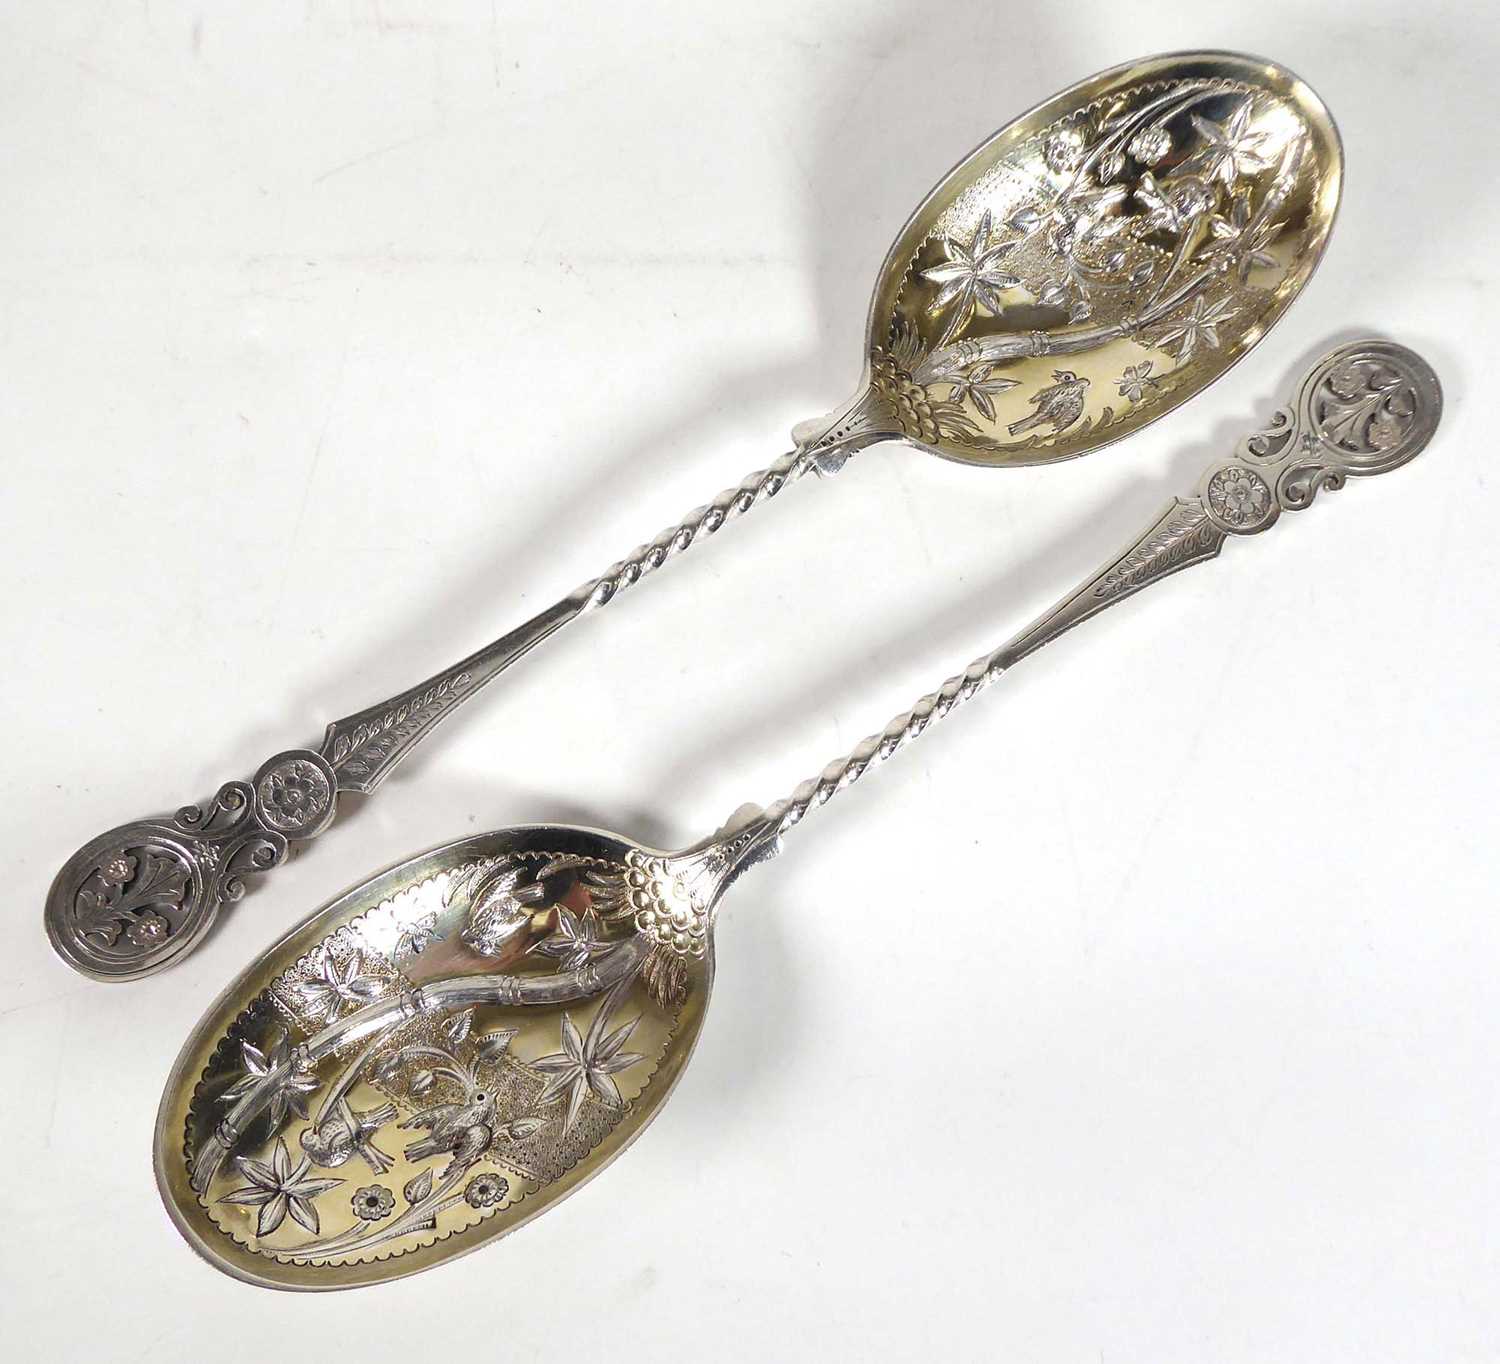 A pair of mid-19th century silver parcel gilt berry spoons, the bowls later engraved in the